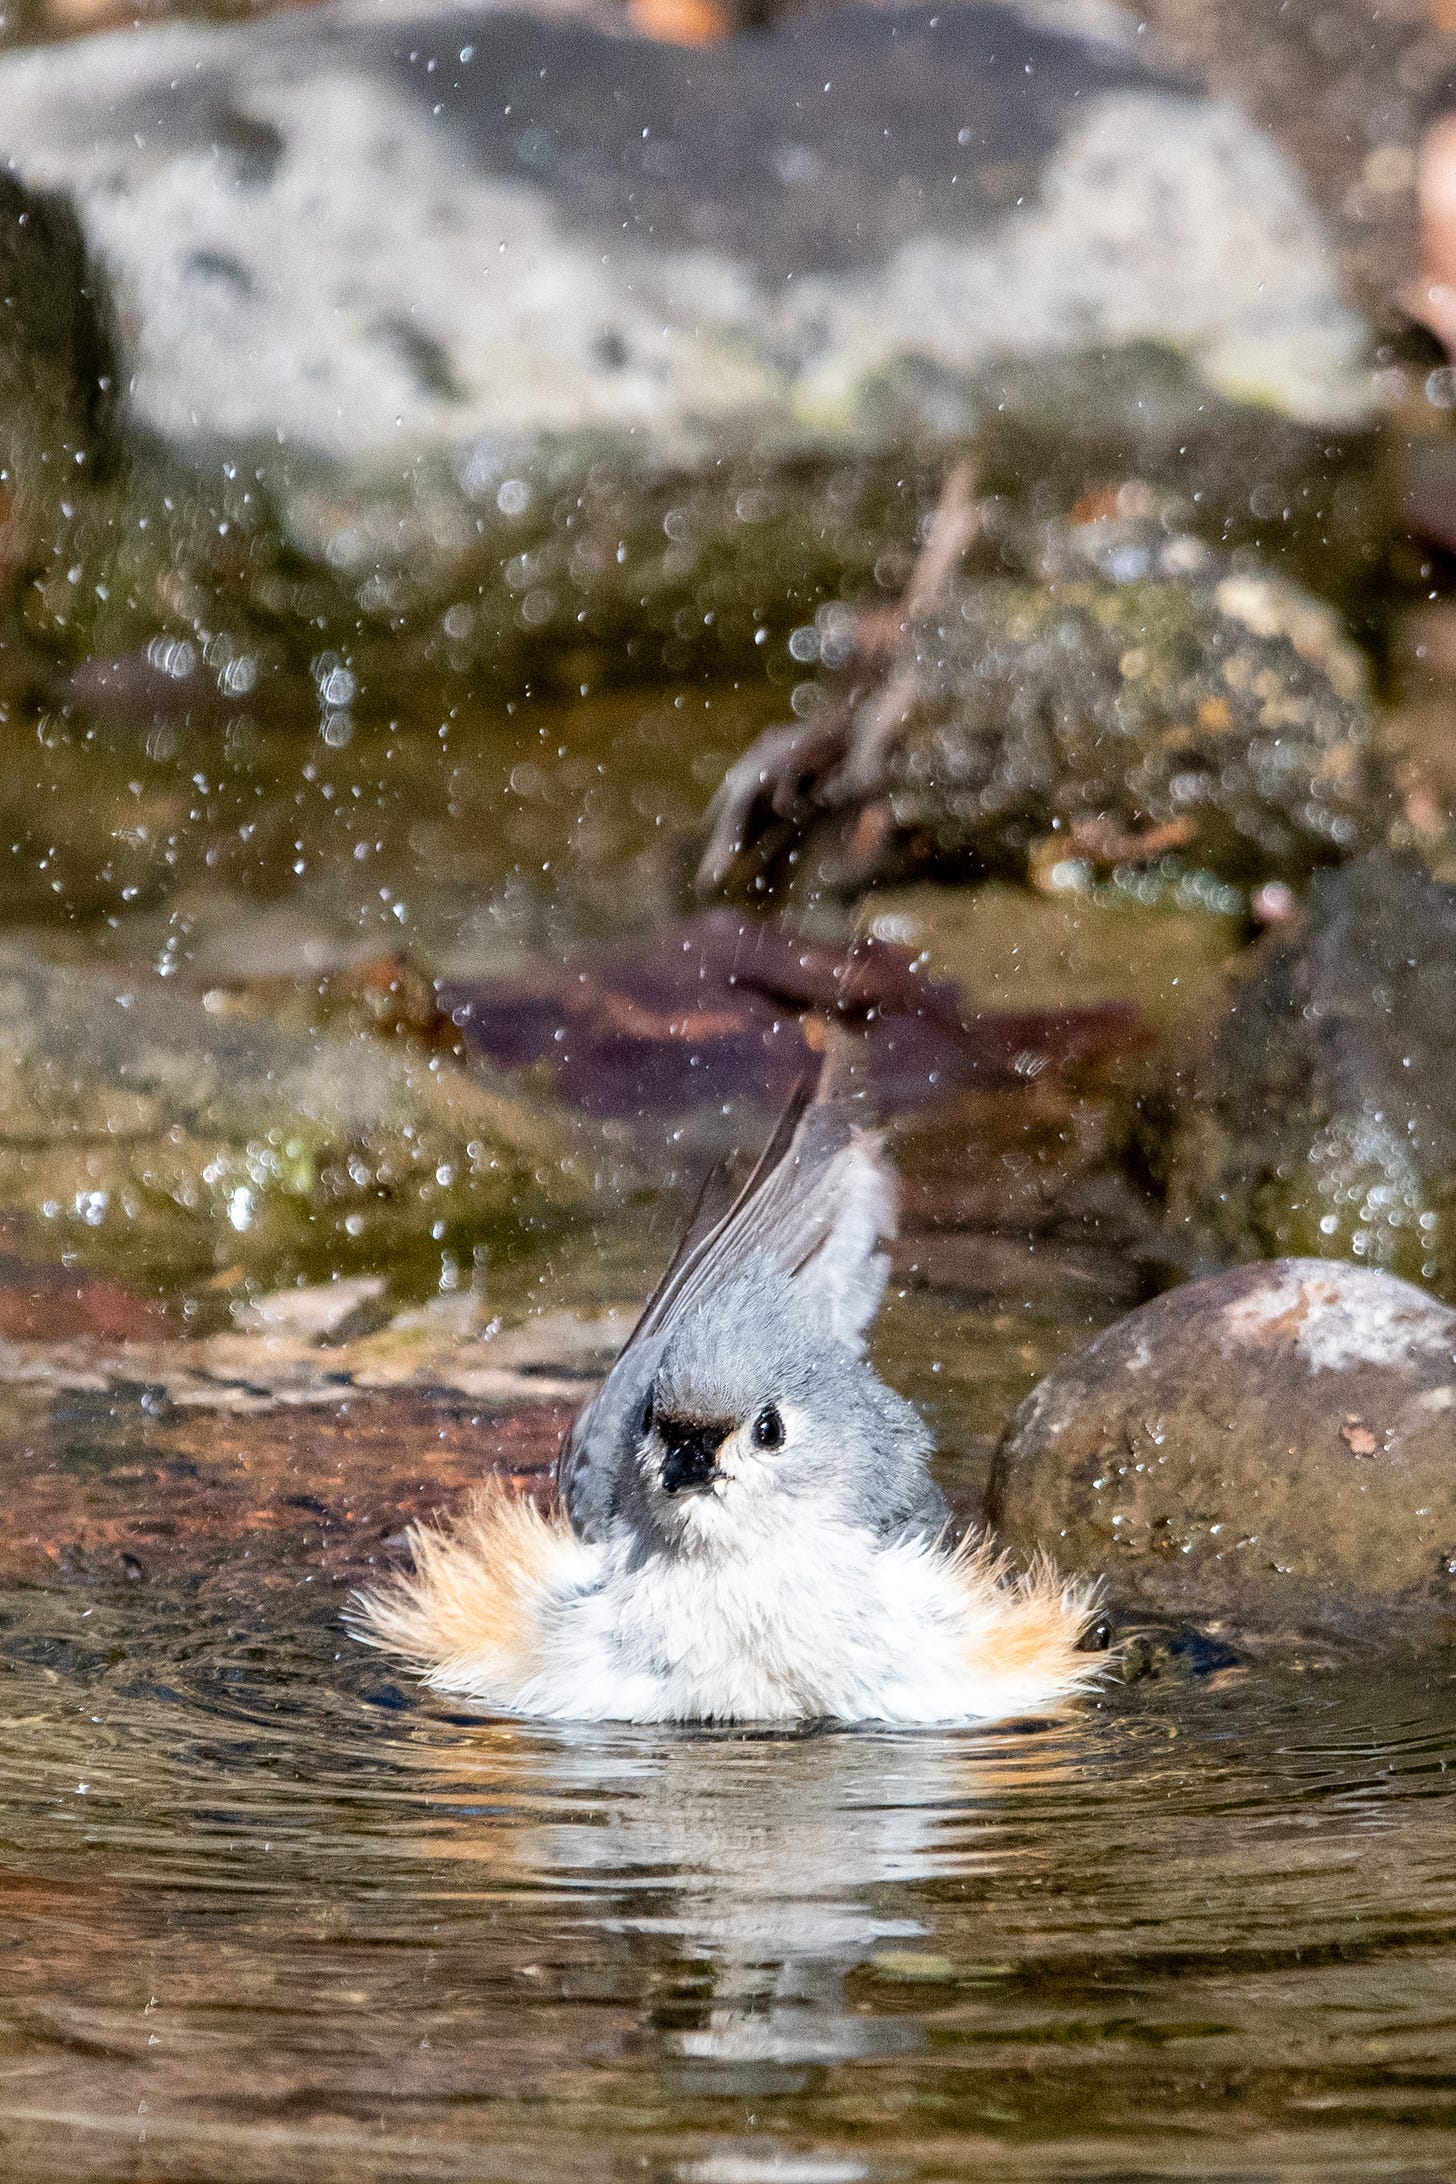 A tufted titmouse in water, wriggling and splashing